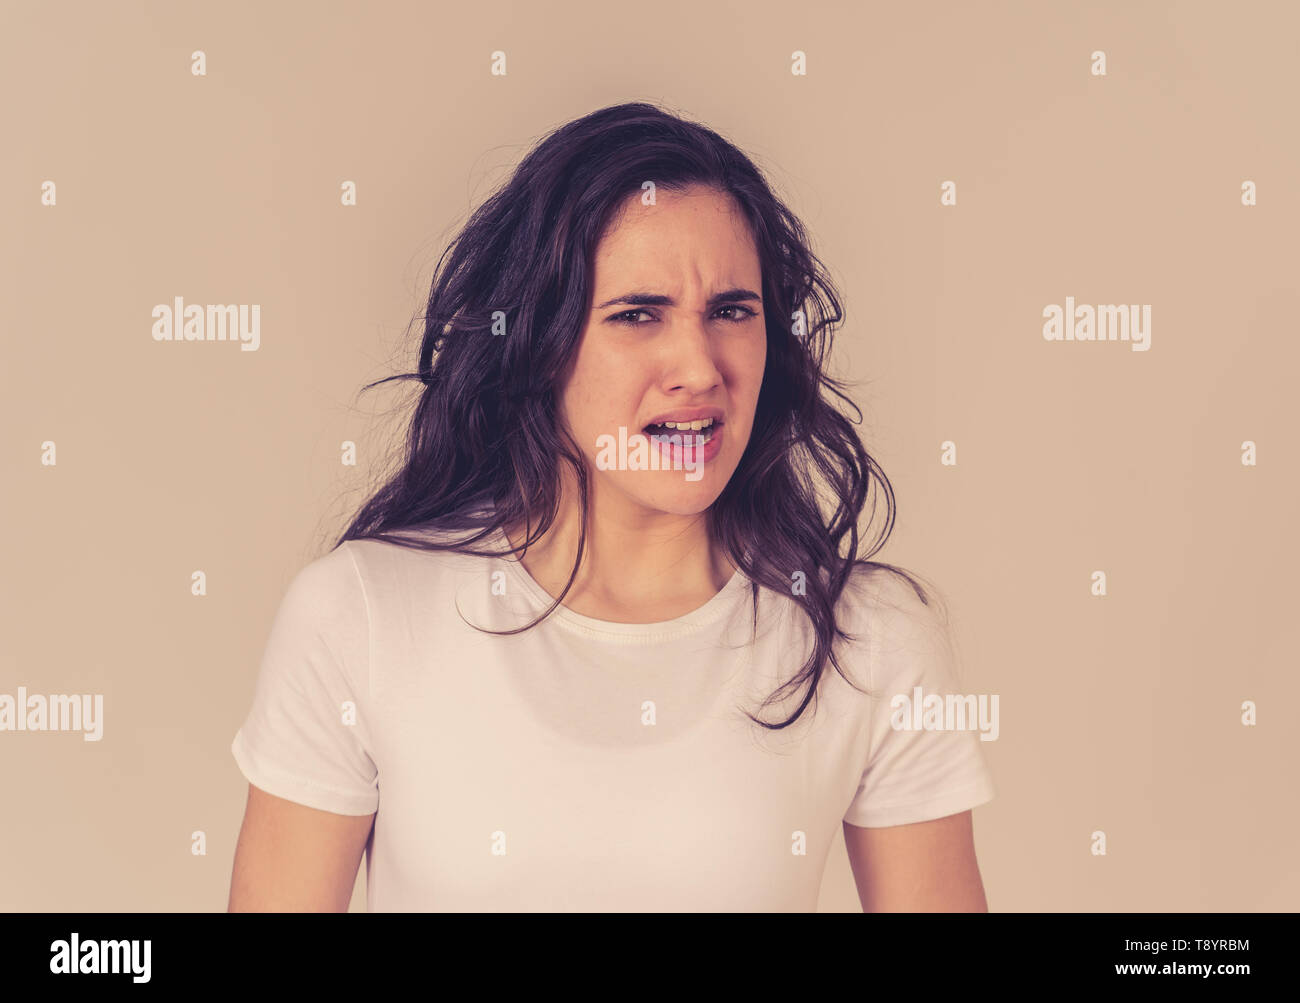 Young latin woman feeling disgust looking at something unpleasant making fear, anxiety gestures trying to cover herself in shock. Portrait with copy s Stock Photo